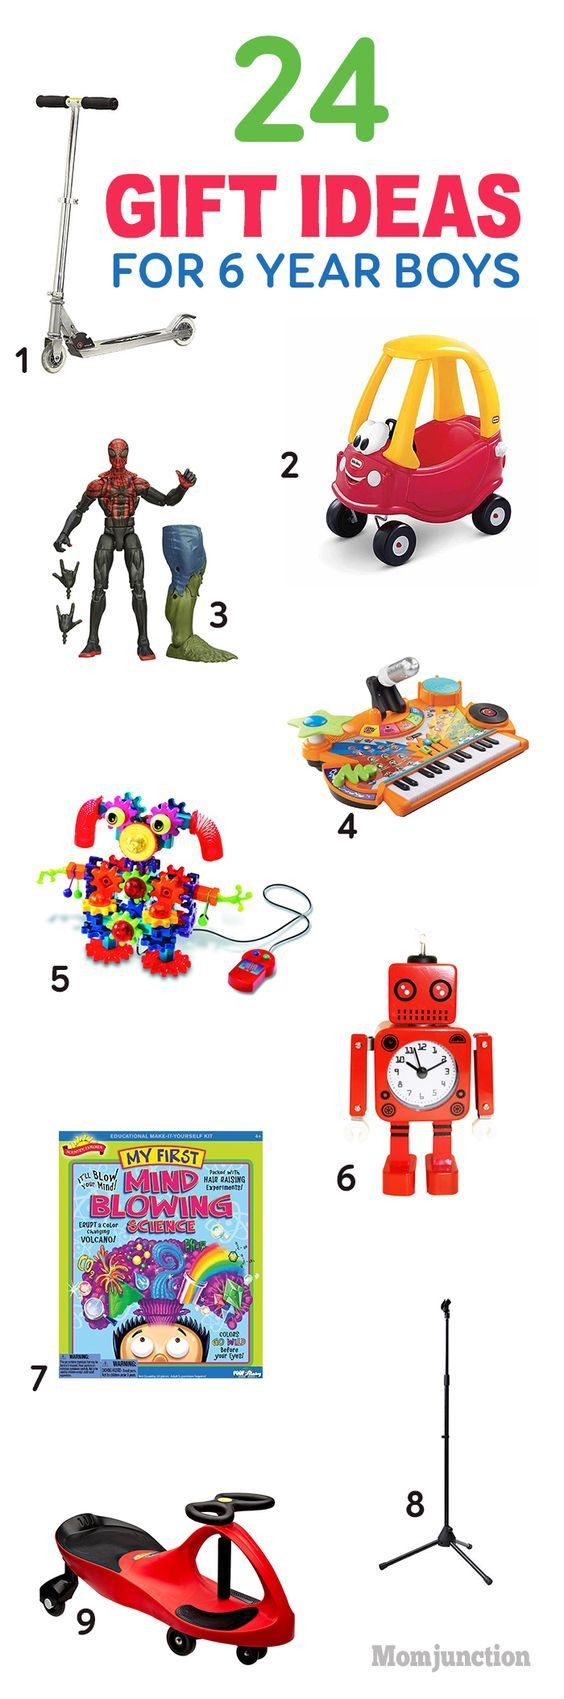 Gift Ideas For 6 Year Old Boys
 21 best Gift Ideas Boys 3 to 7 images on Pinterest